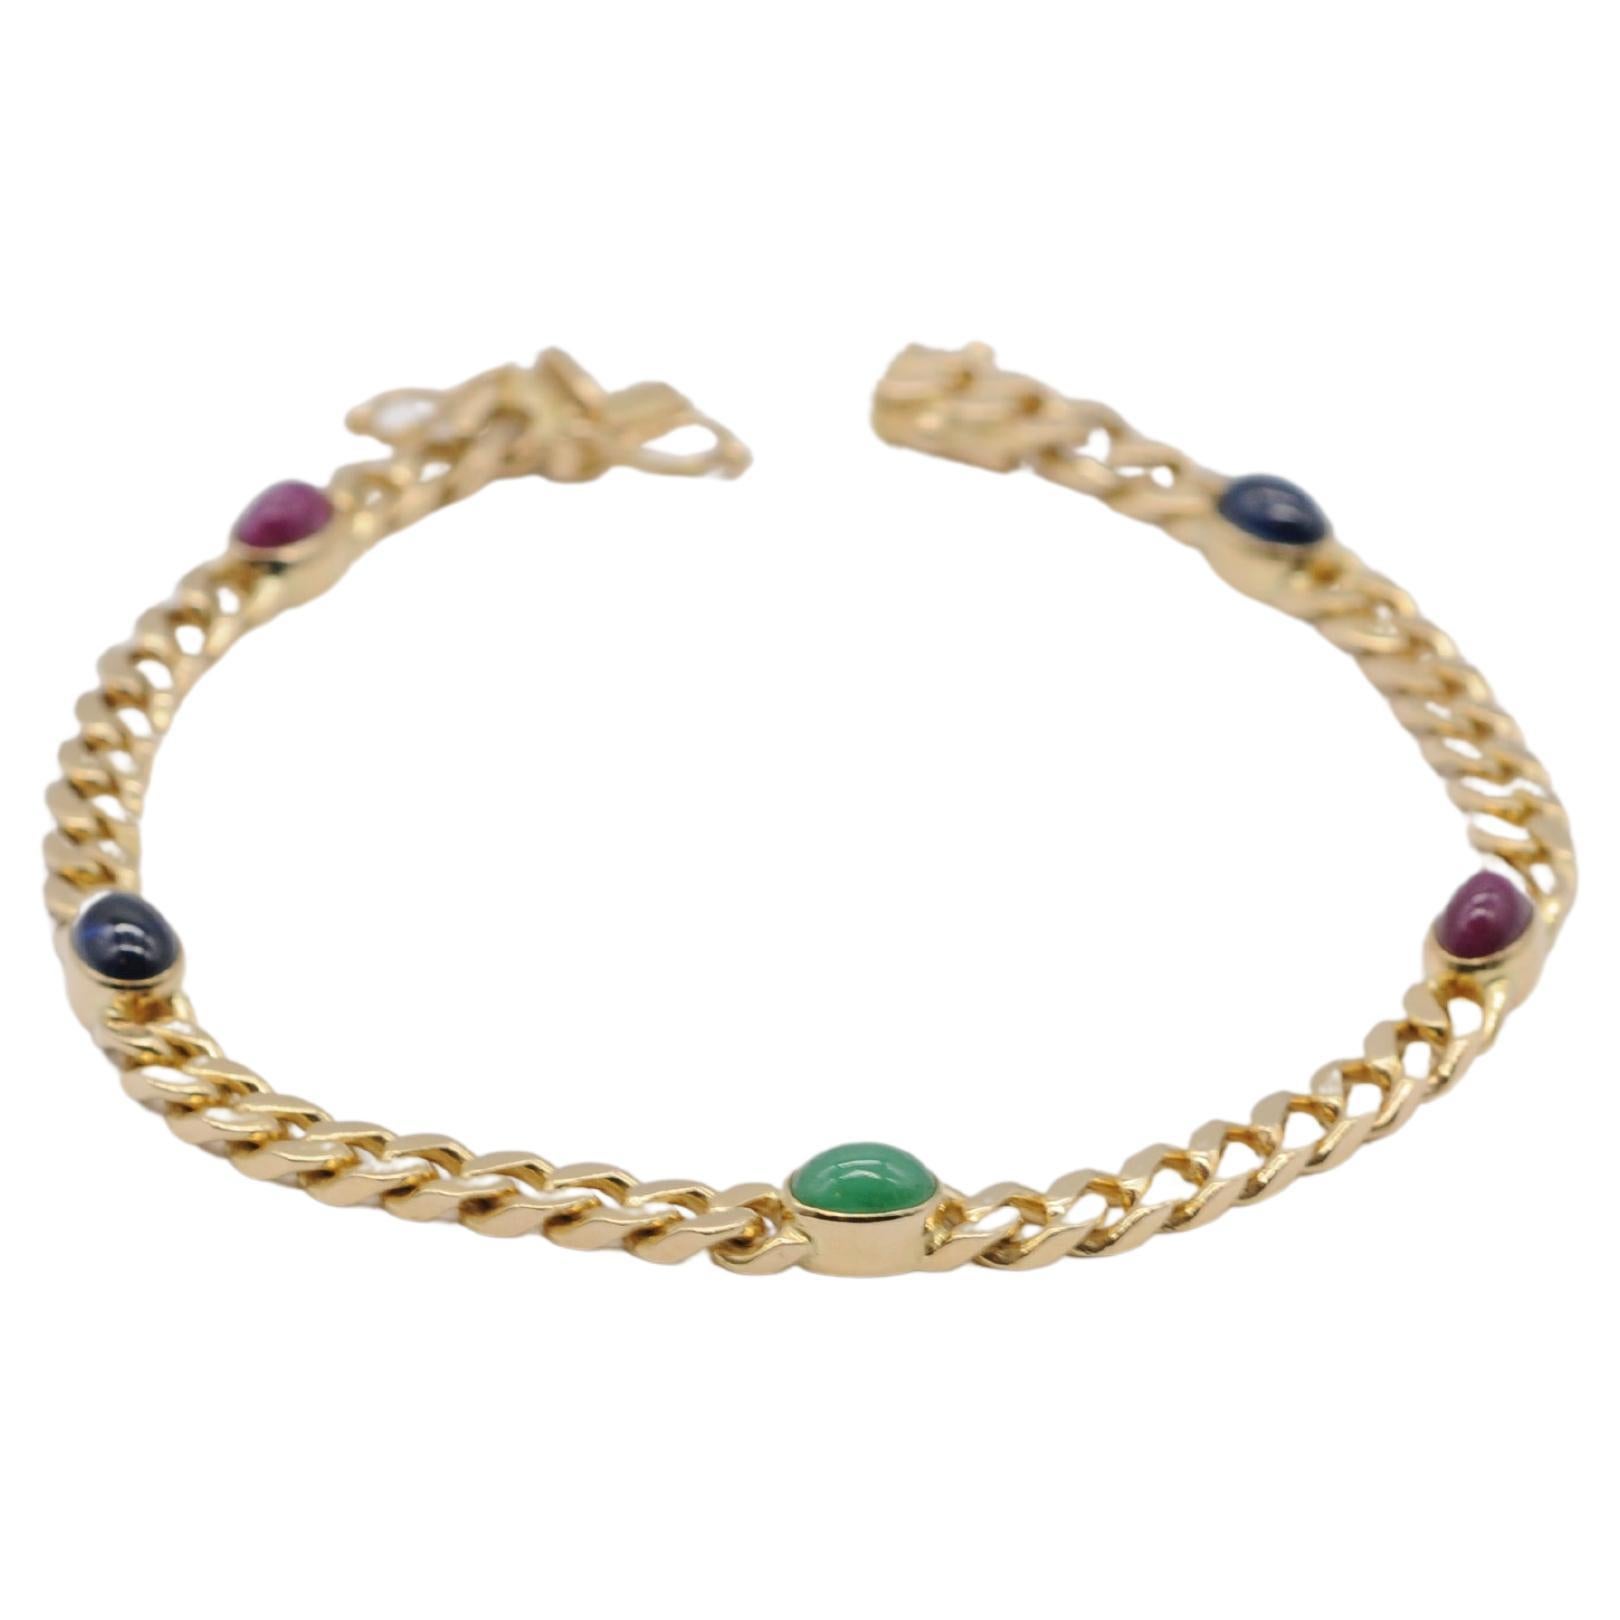 Noble 14k yellow gold bracelet with cabochon For Sale 9